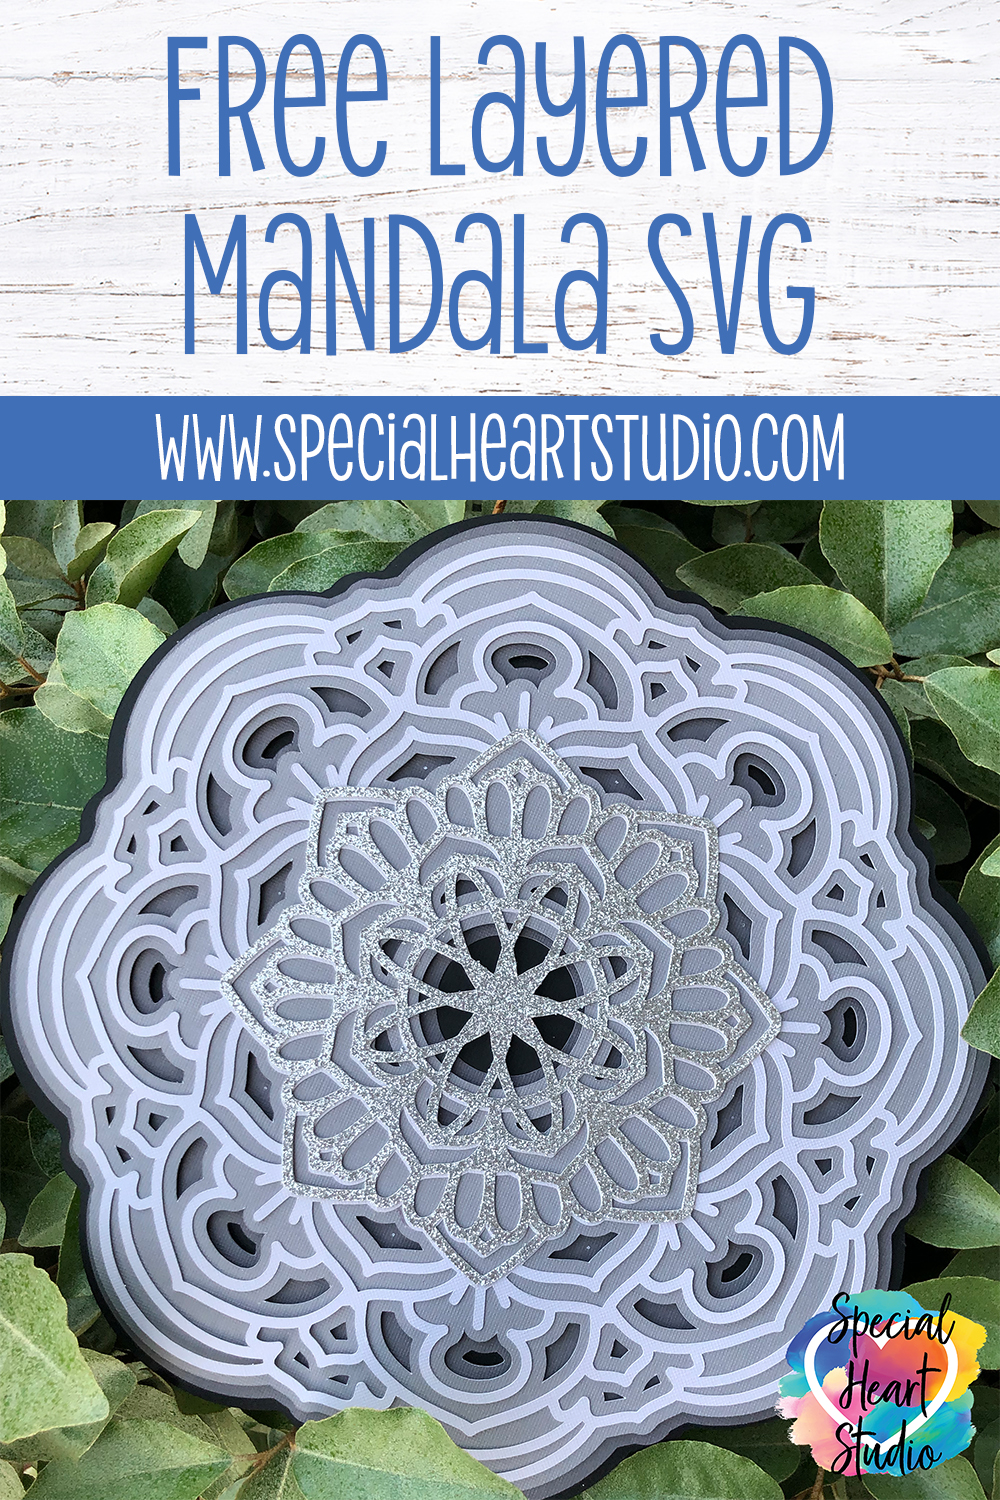 Download Where To Find Free Layered 3D Mandalas